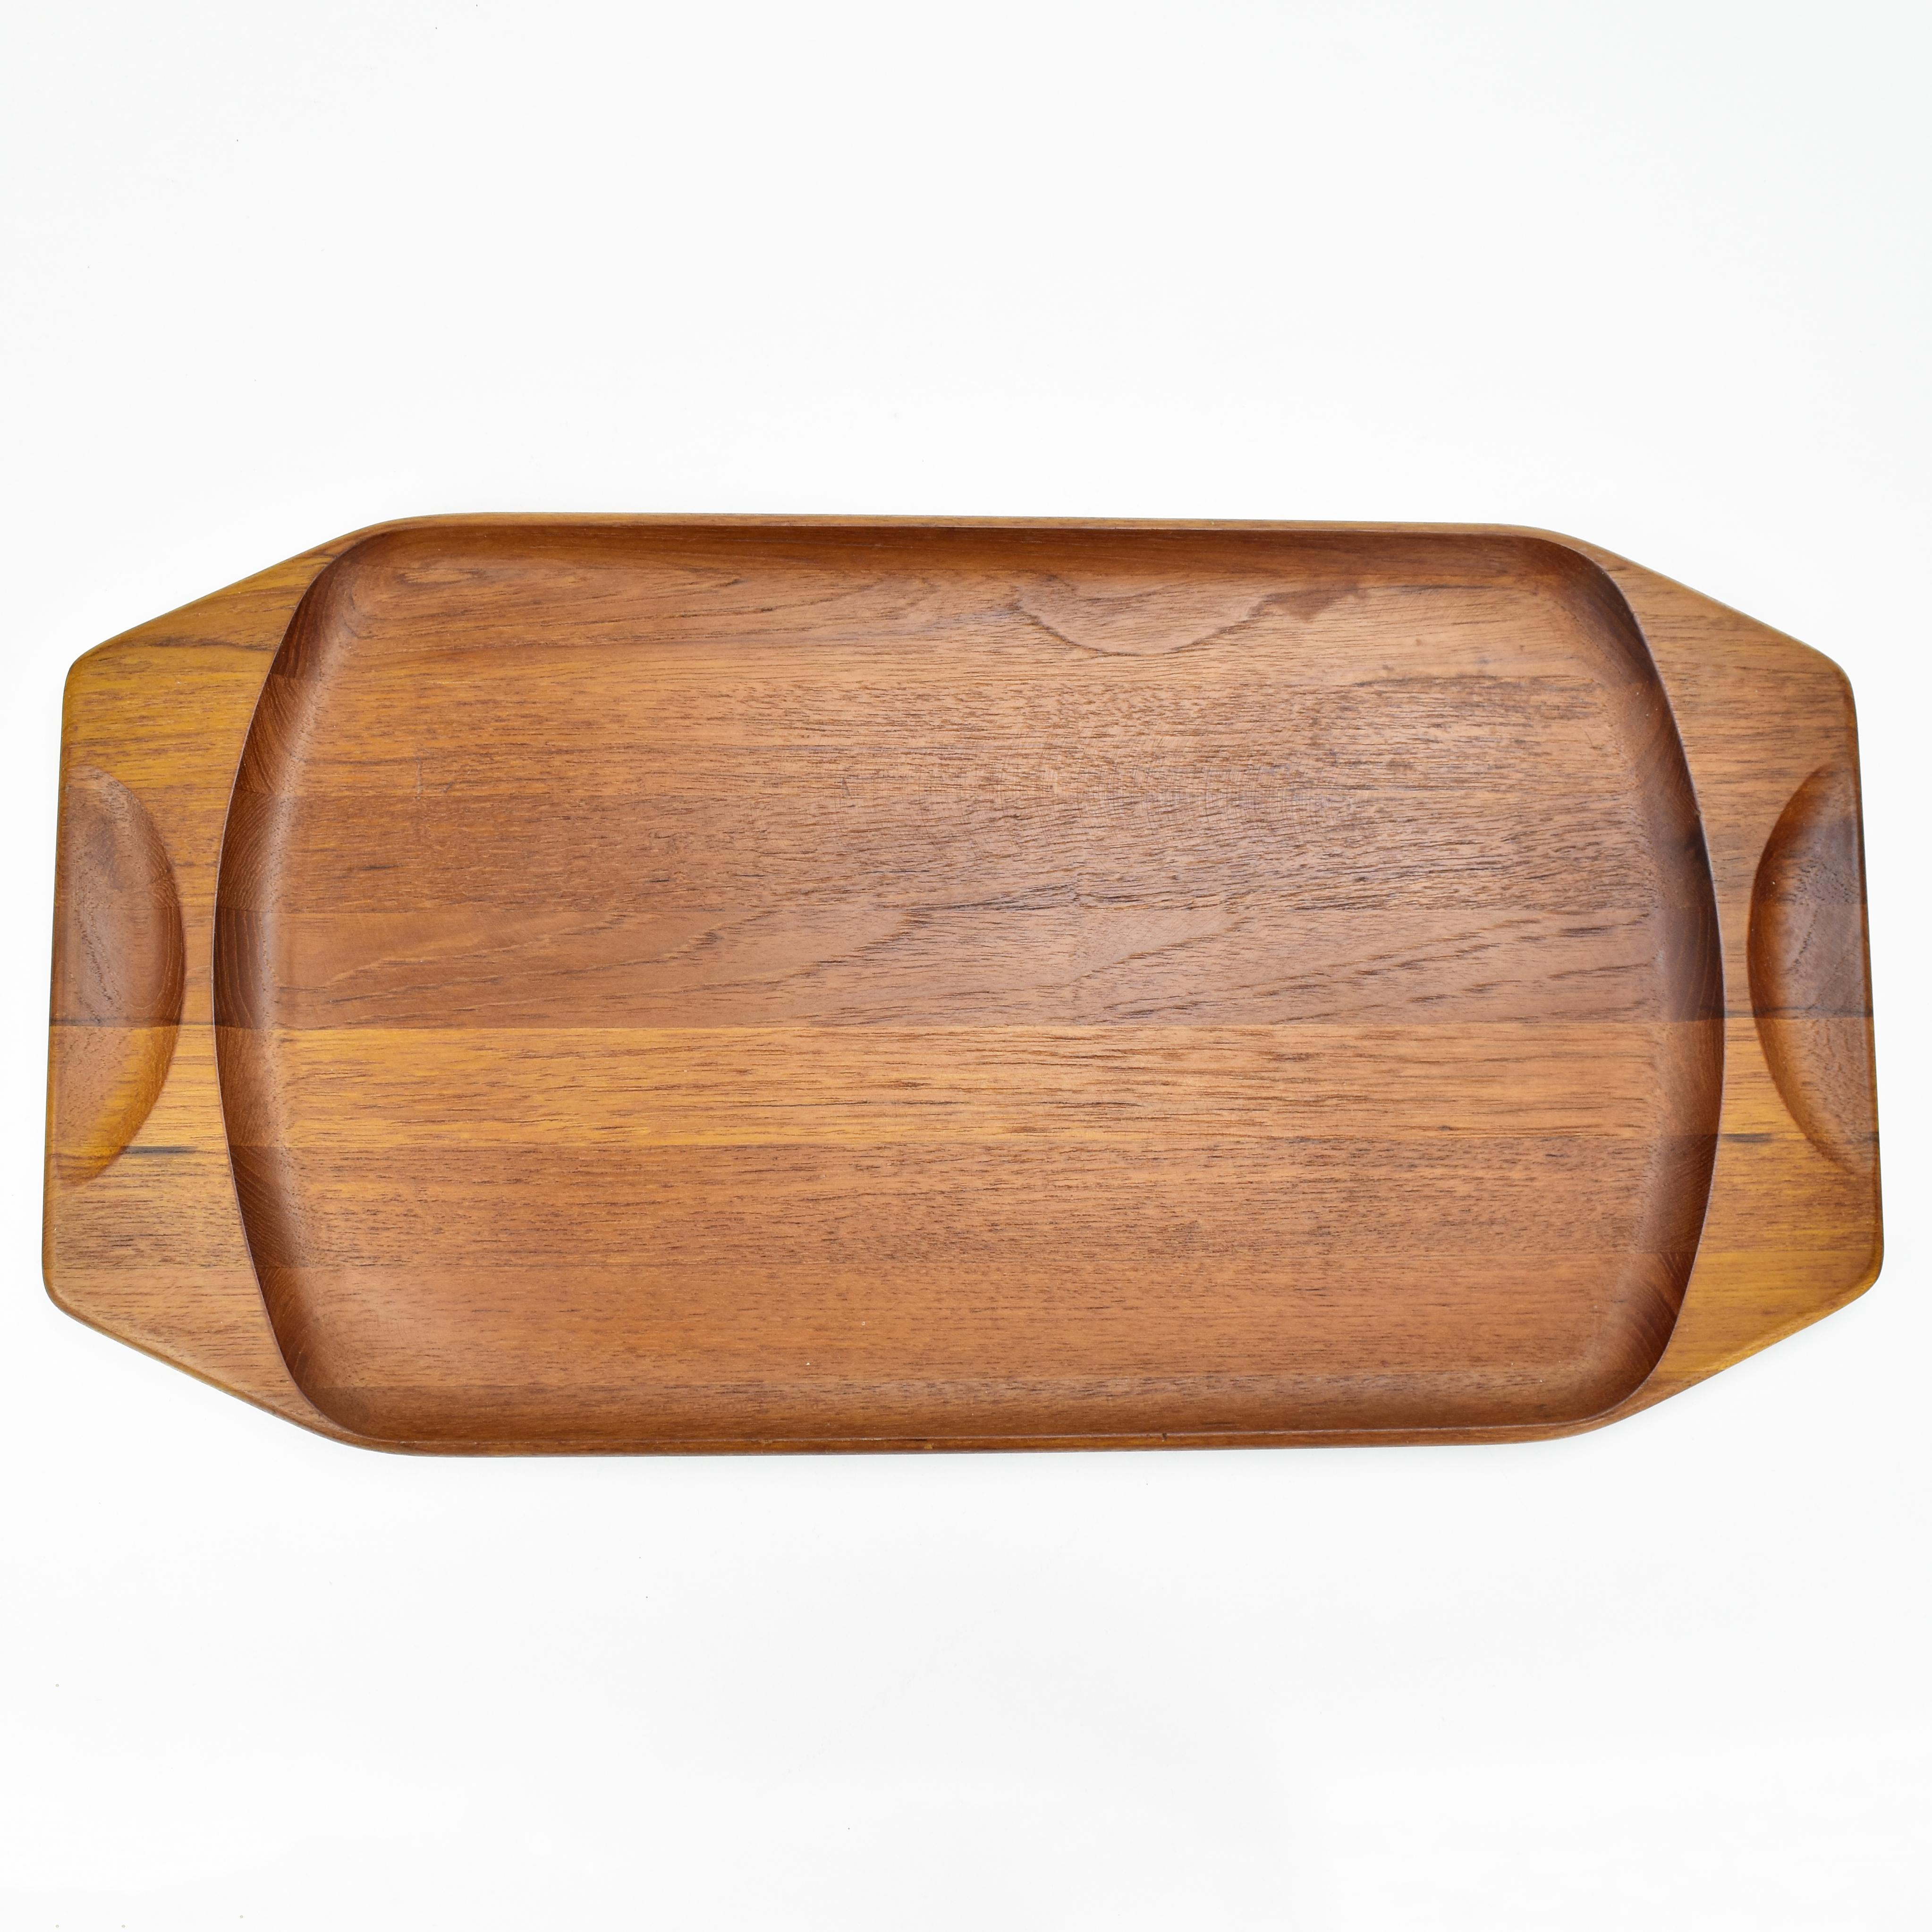 A beautiful vintage 1950s teak tray with clear edges, by famous Danish Designer Jens Quistgaard. A charming and useful object in very good condition.